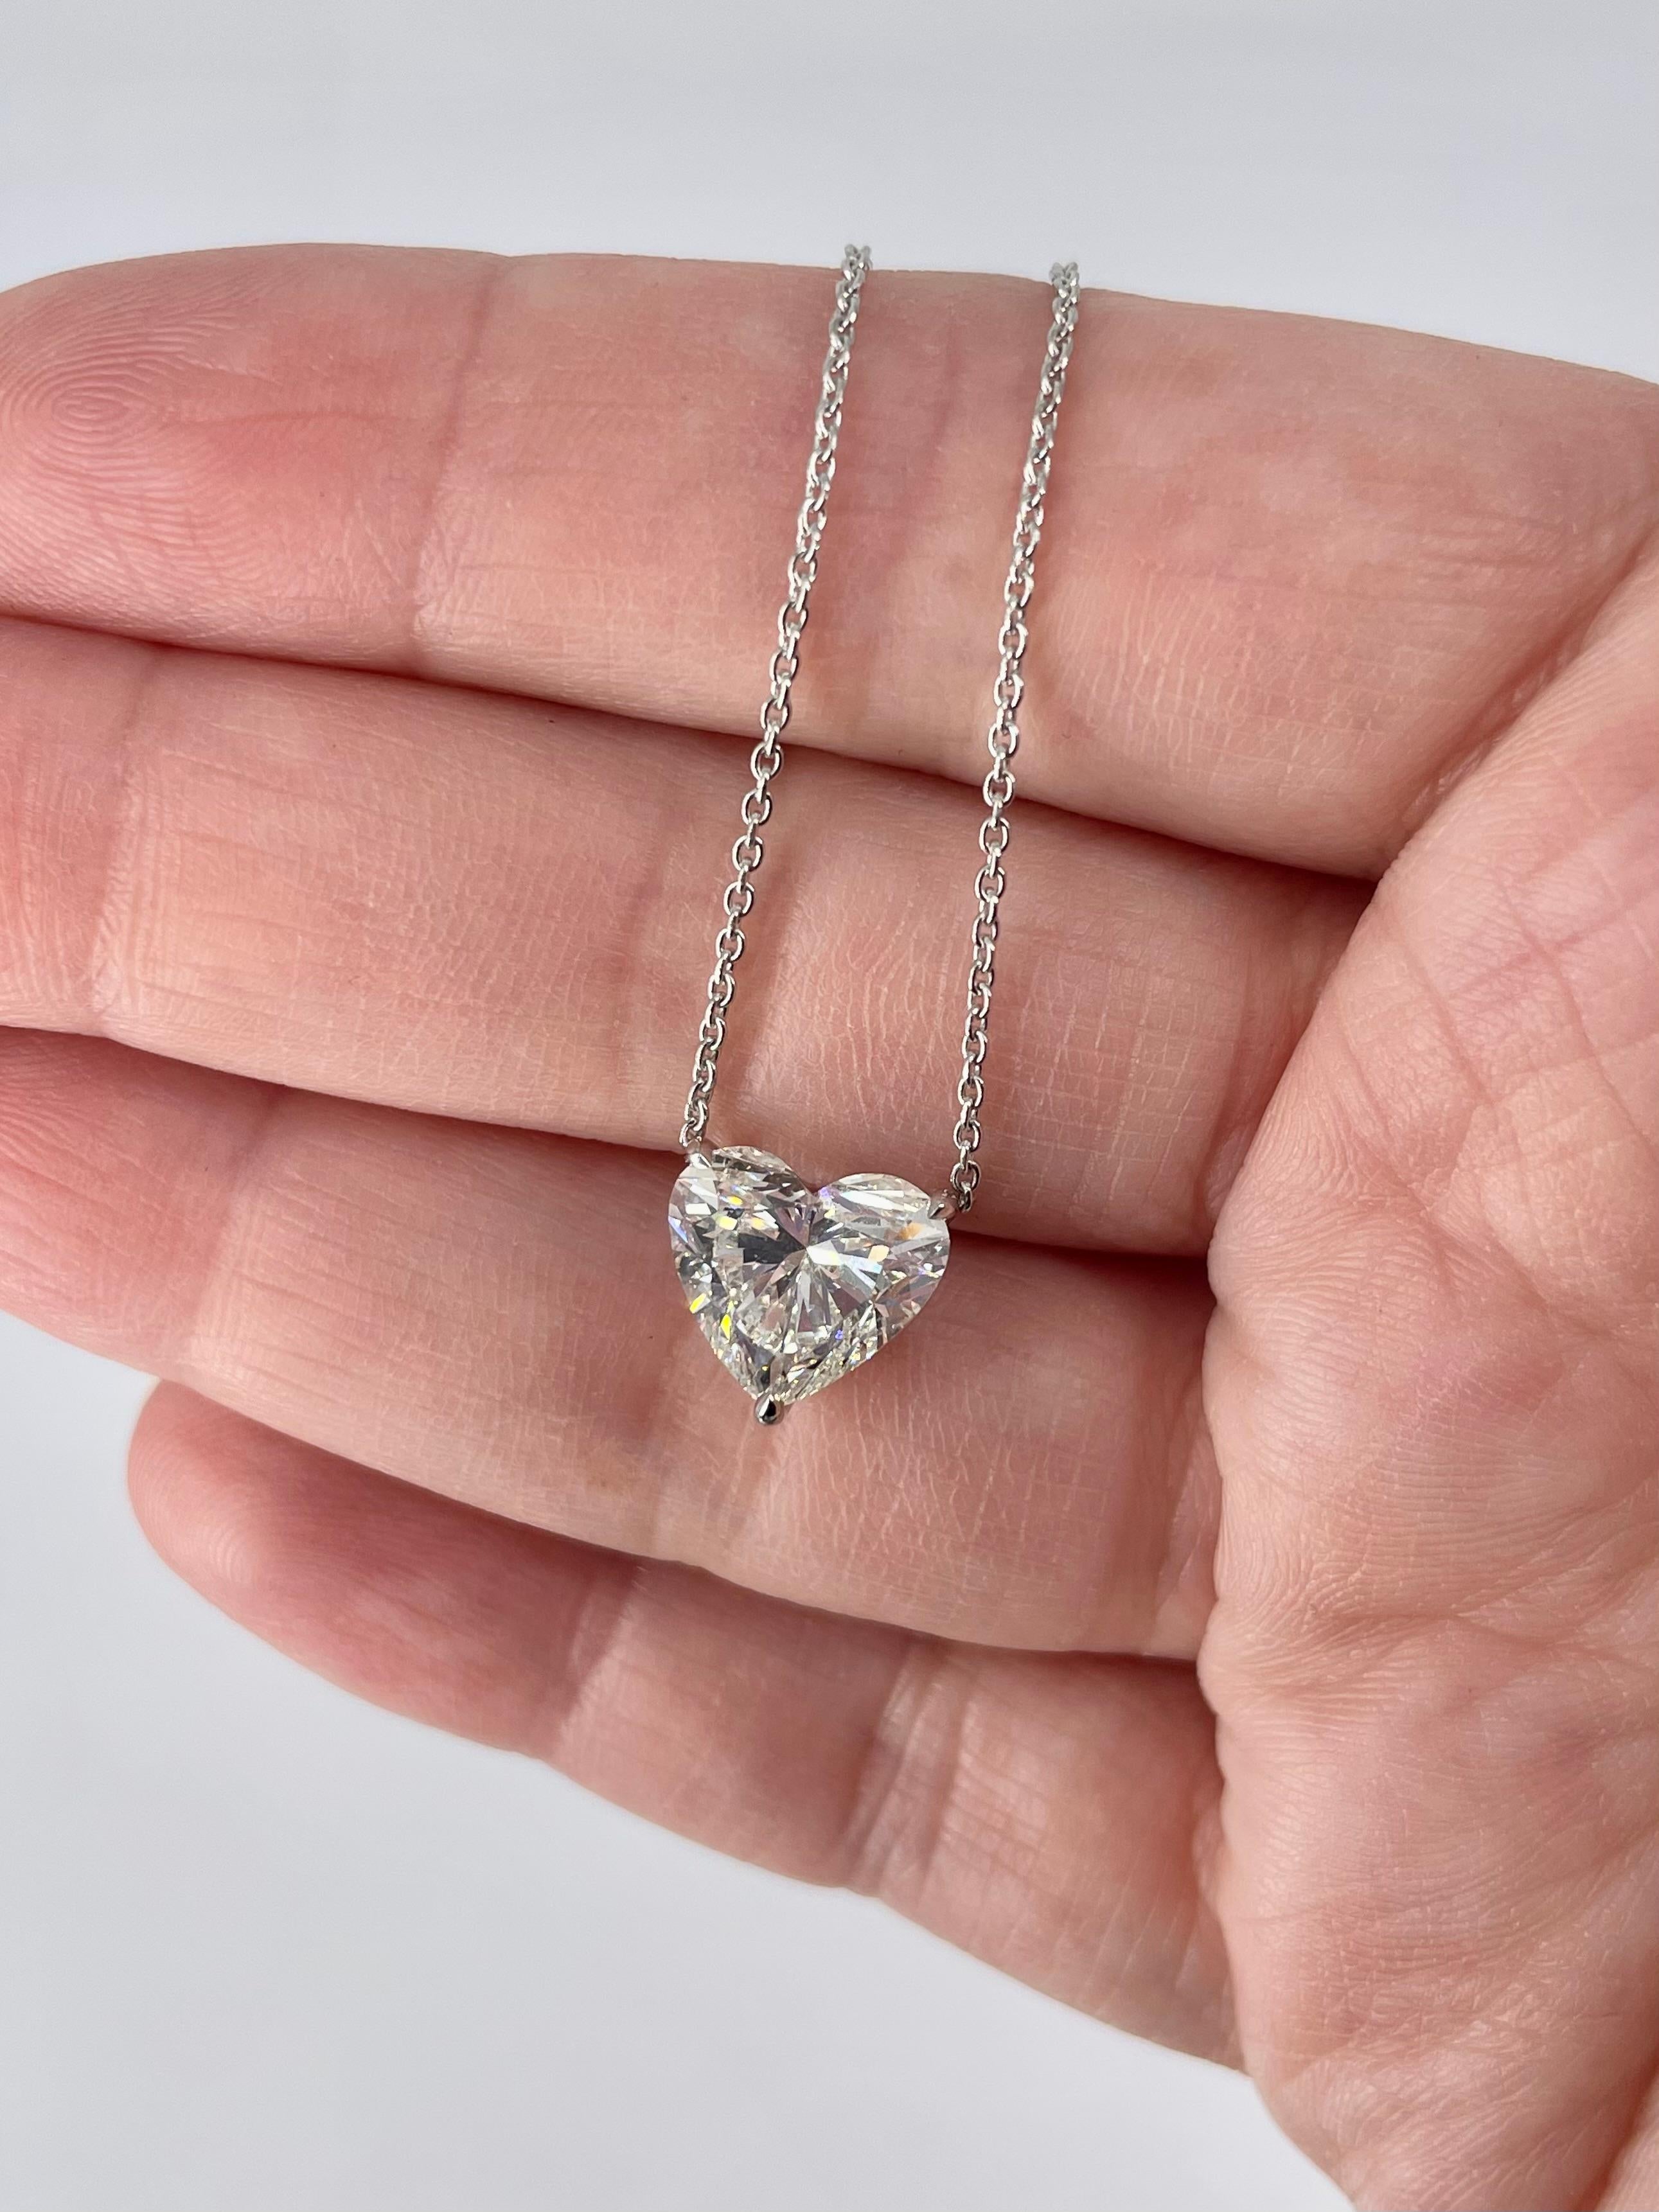 J. Birnbach 2.82 carat Heart Shape Diamond Pendant  In New Condition For Sale In New York, NY